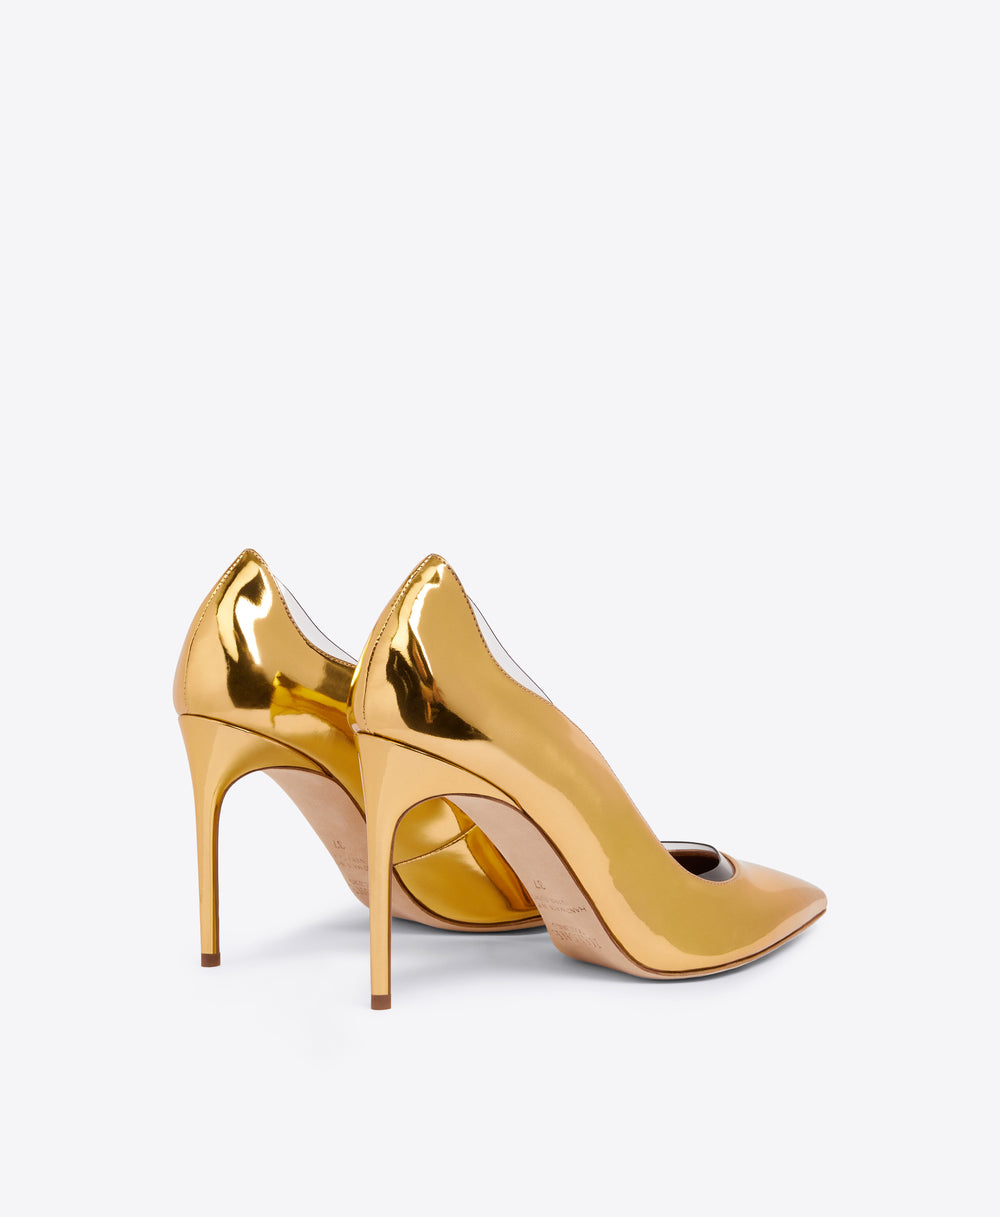 Nana 90mm - Gold Mirror Leather Stiletto Heels Malone Souliers